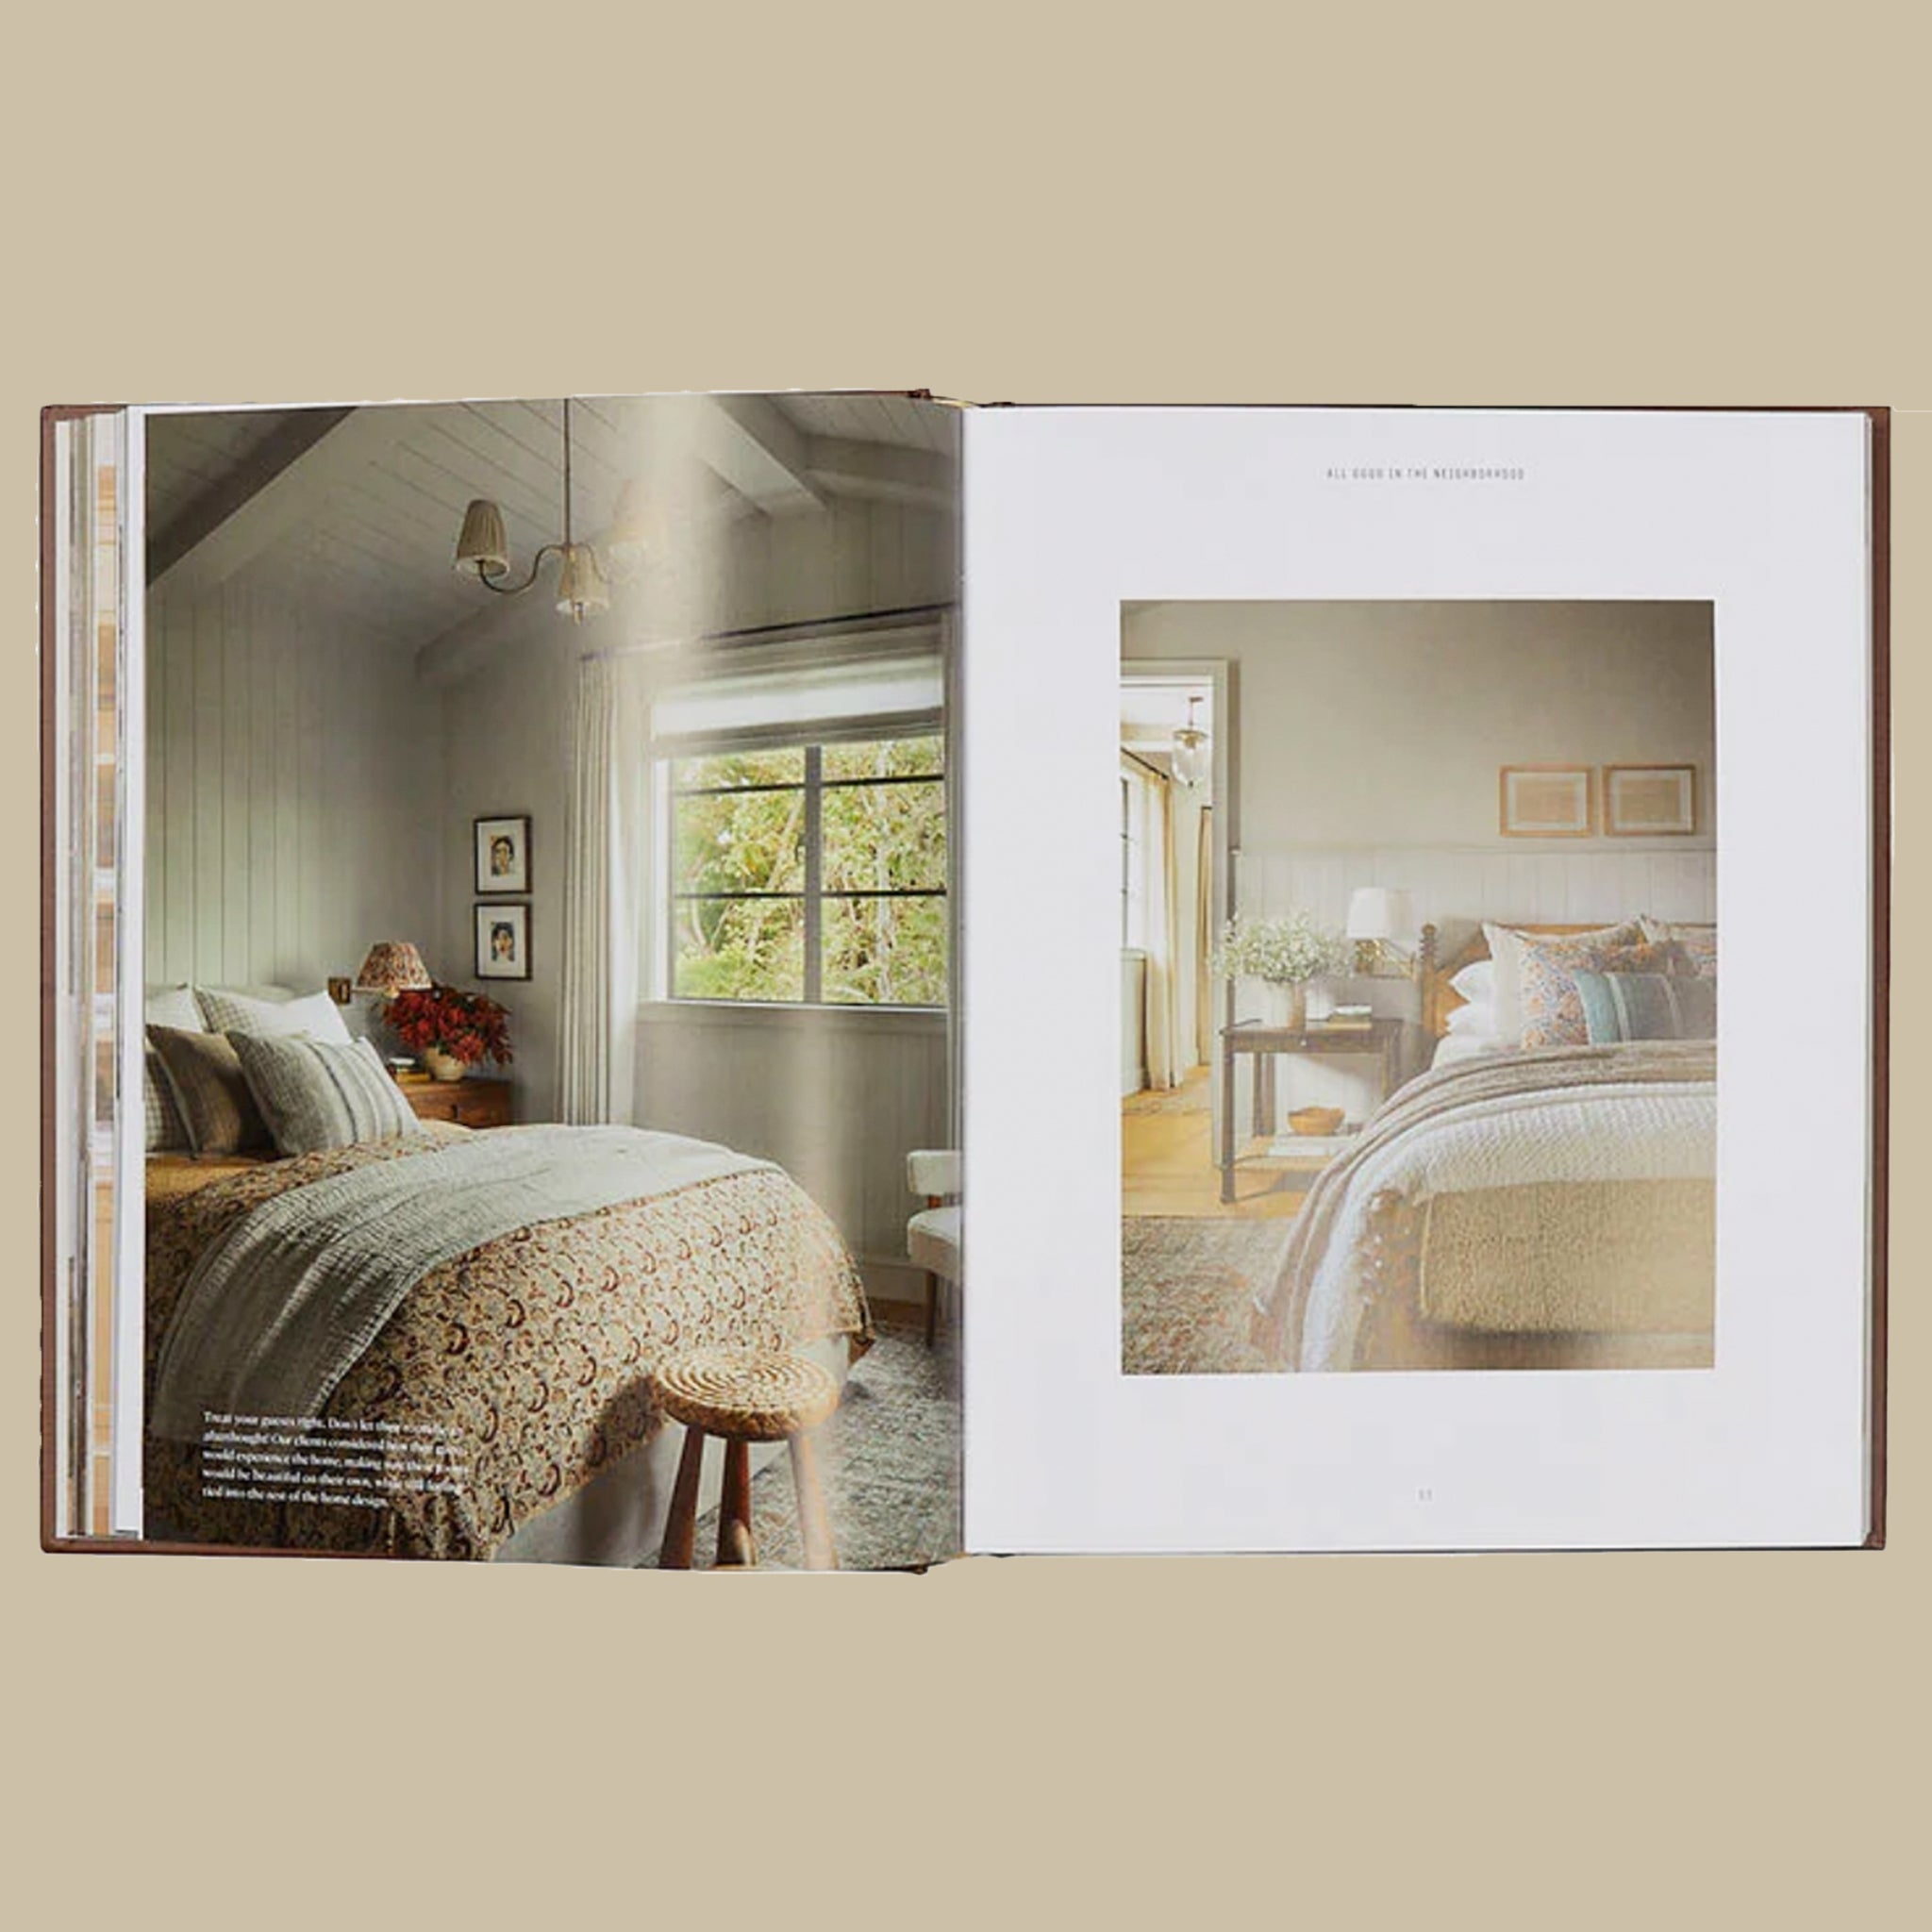 On a tan background is the book opened to a page in the book that features beautiful photographs of the interiors designed by Amber Lewis. 